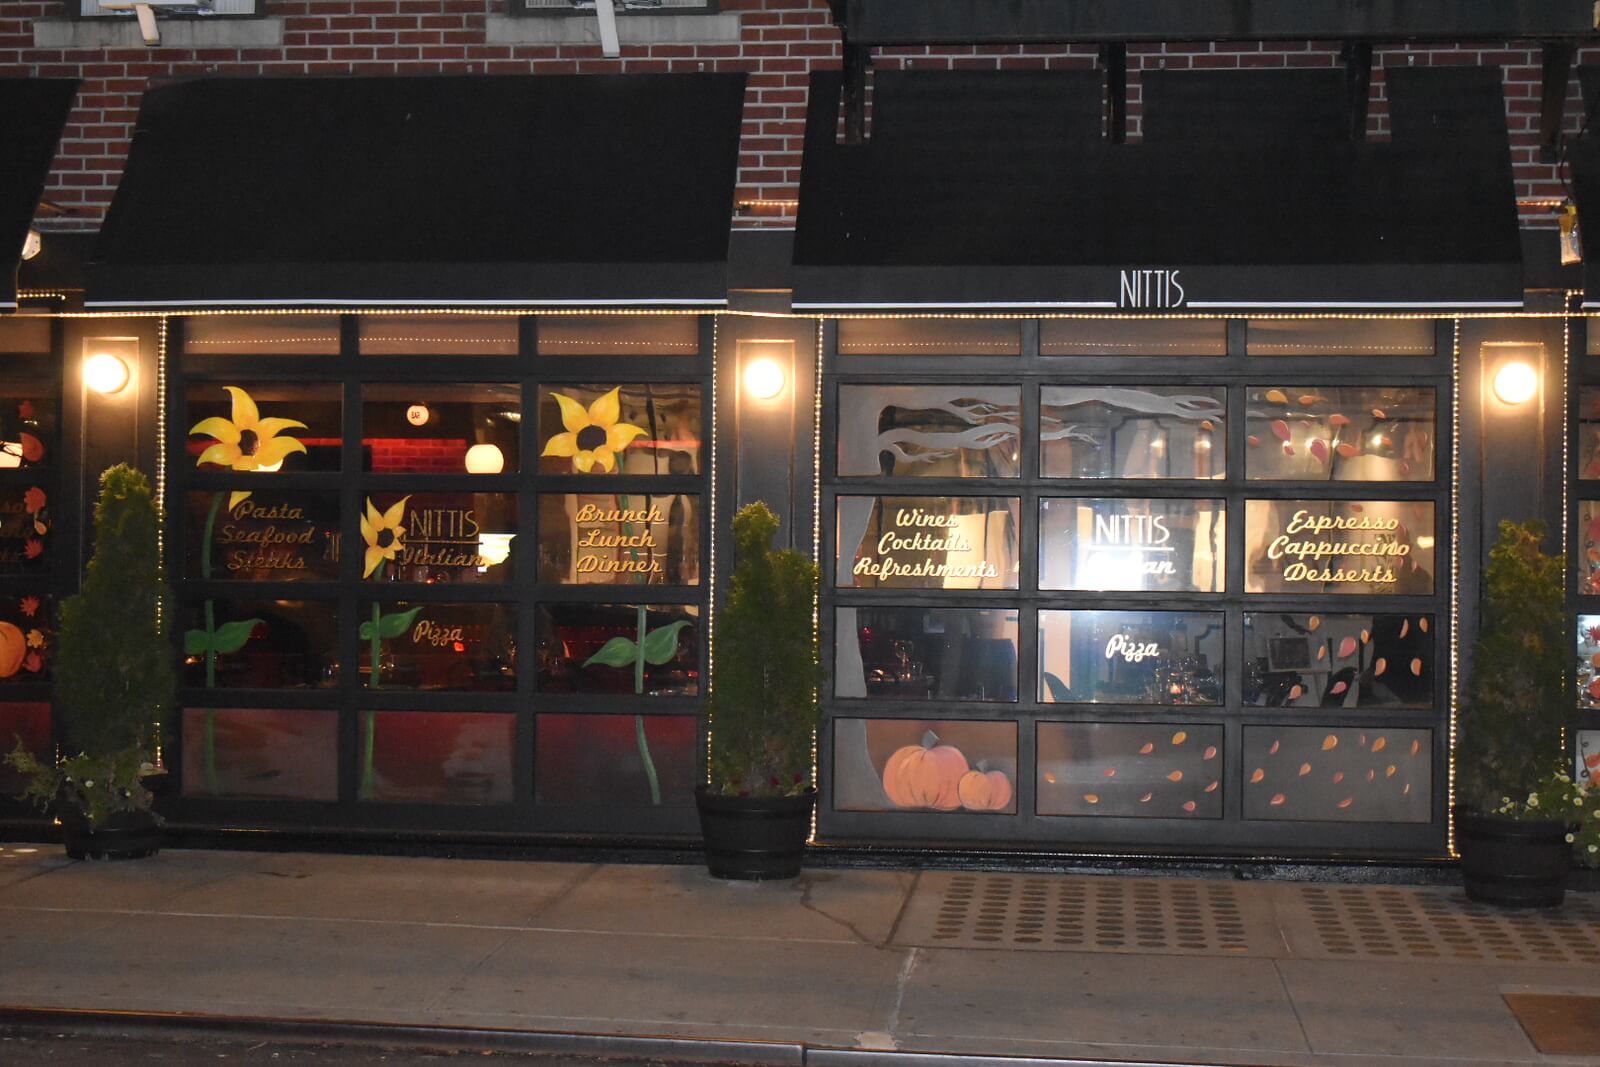 Street view of the restaurant with pumpkins and flowers painted on the windows